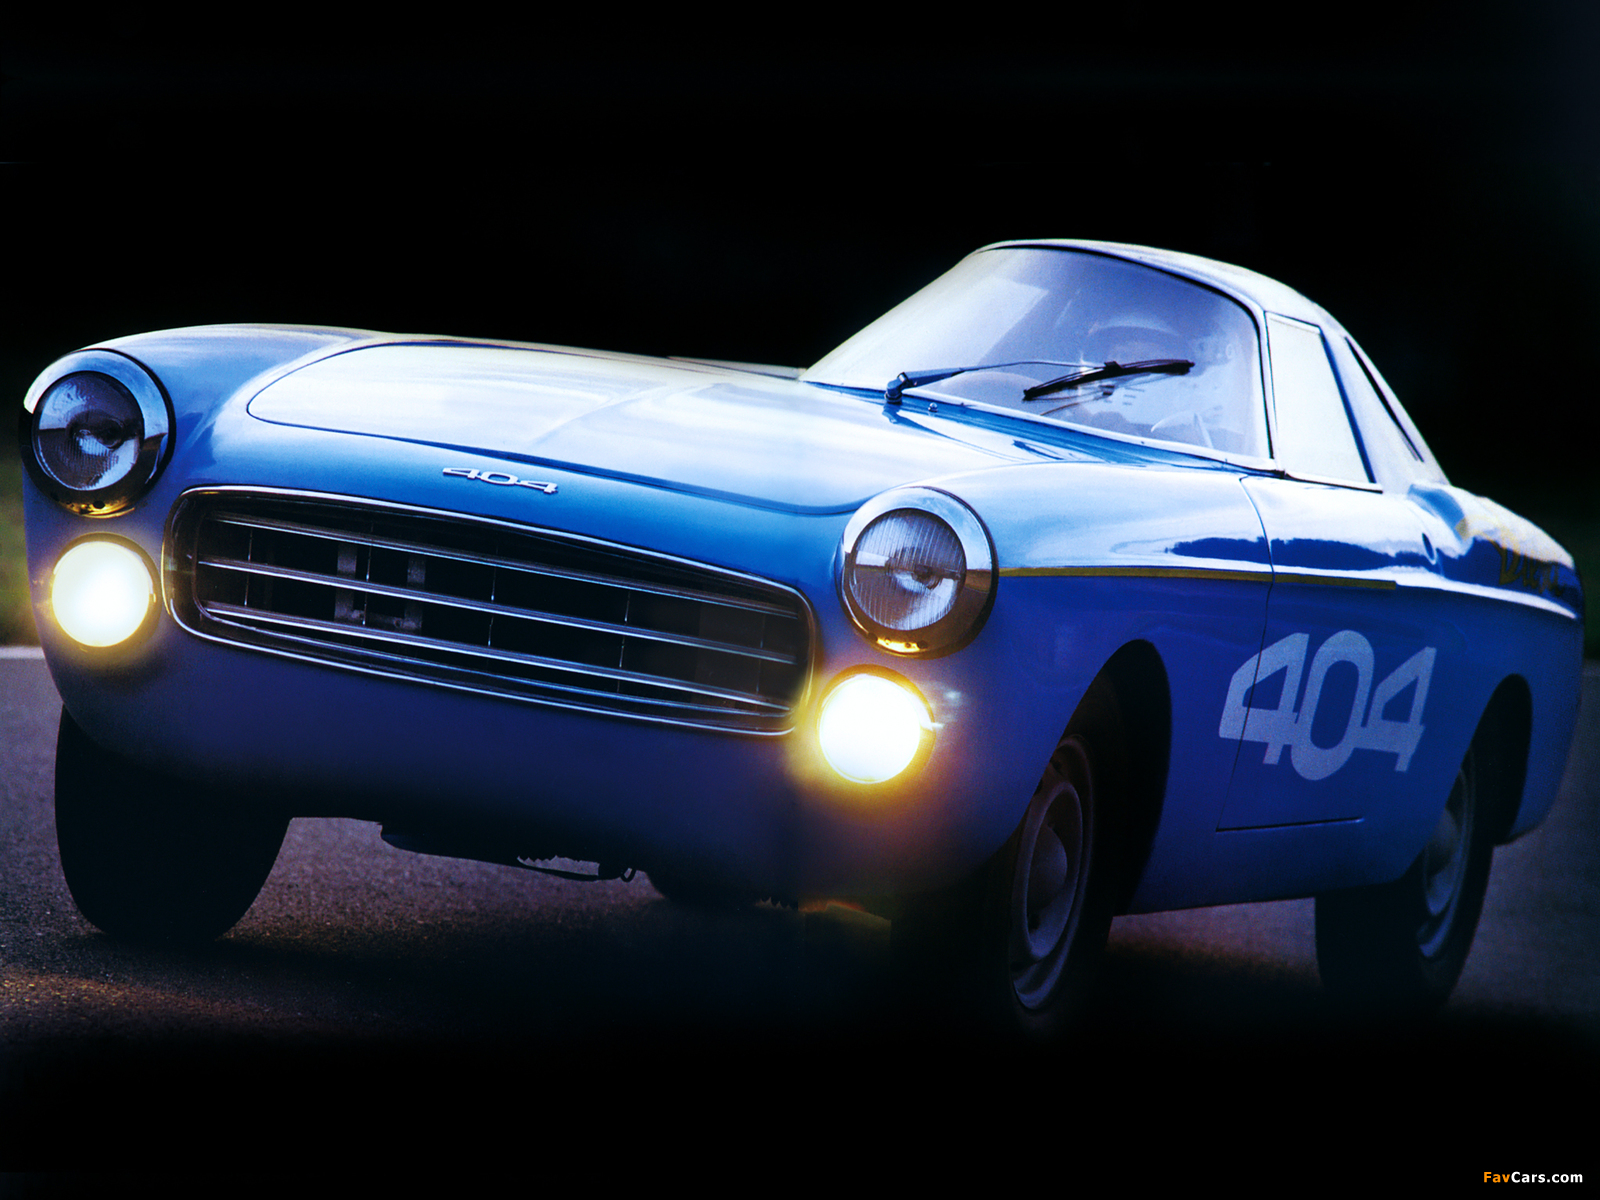 Peugeot 404 Diesel Record Car 1965 pictures (1600 x 1200)